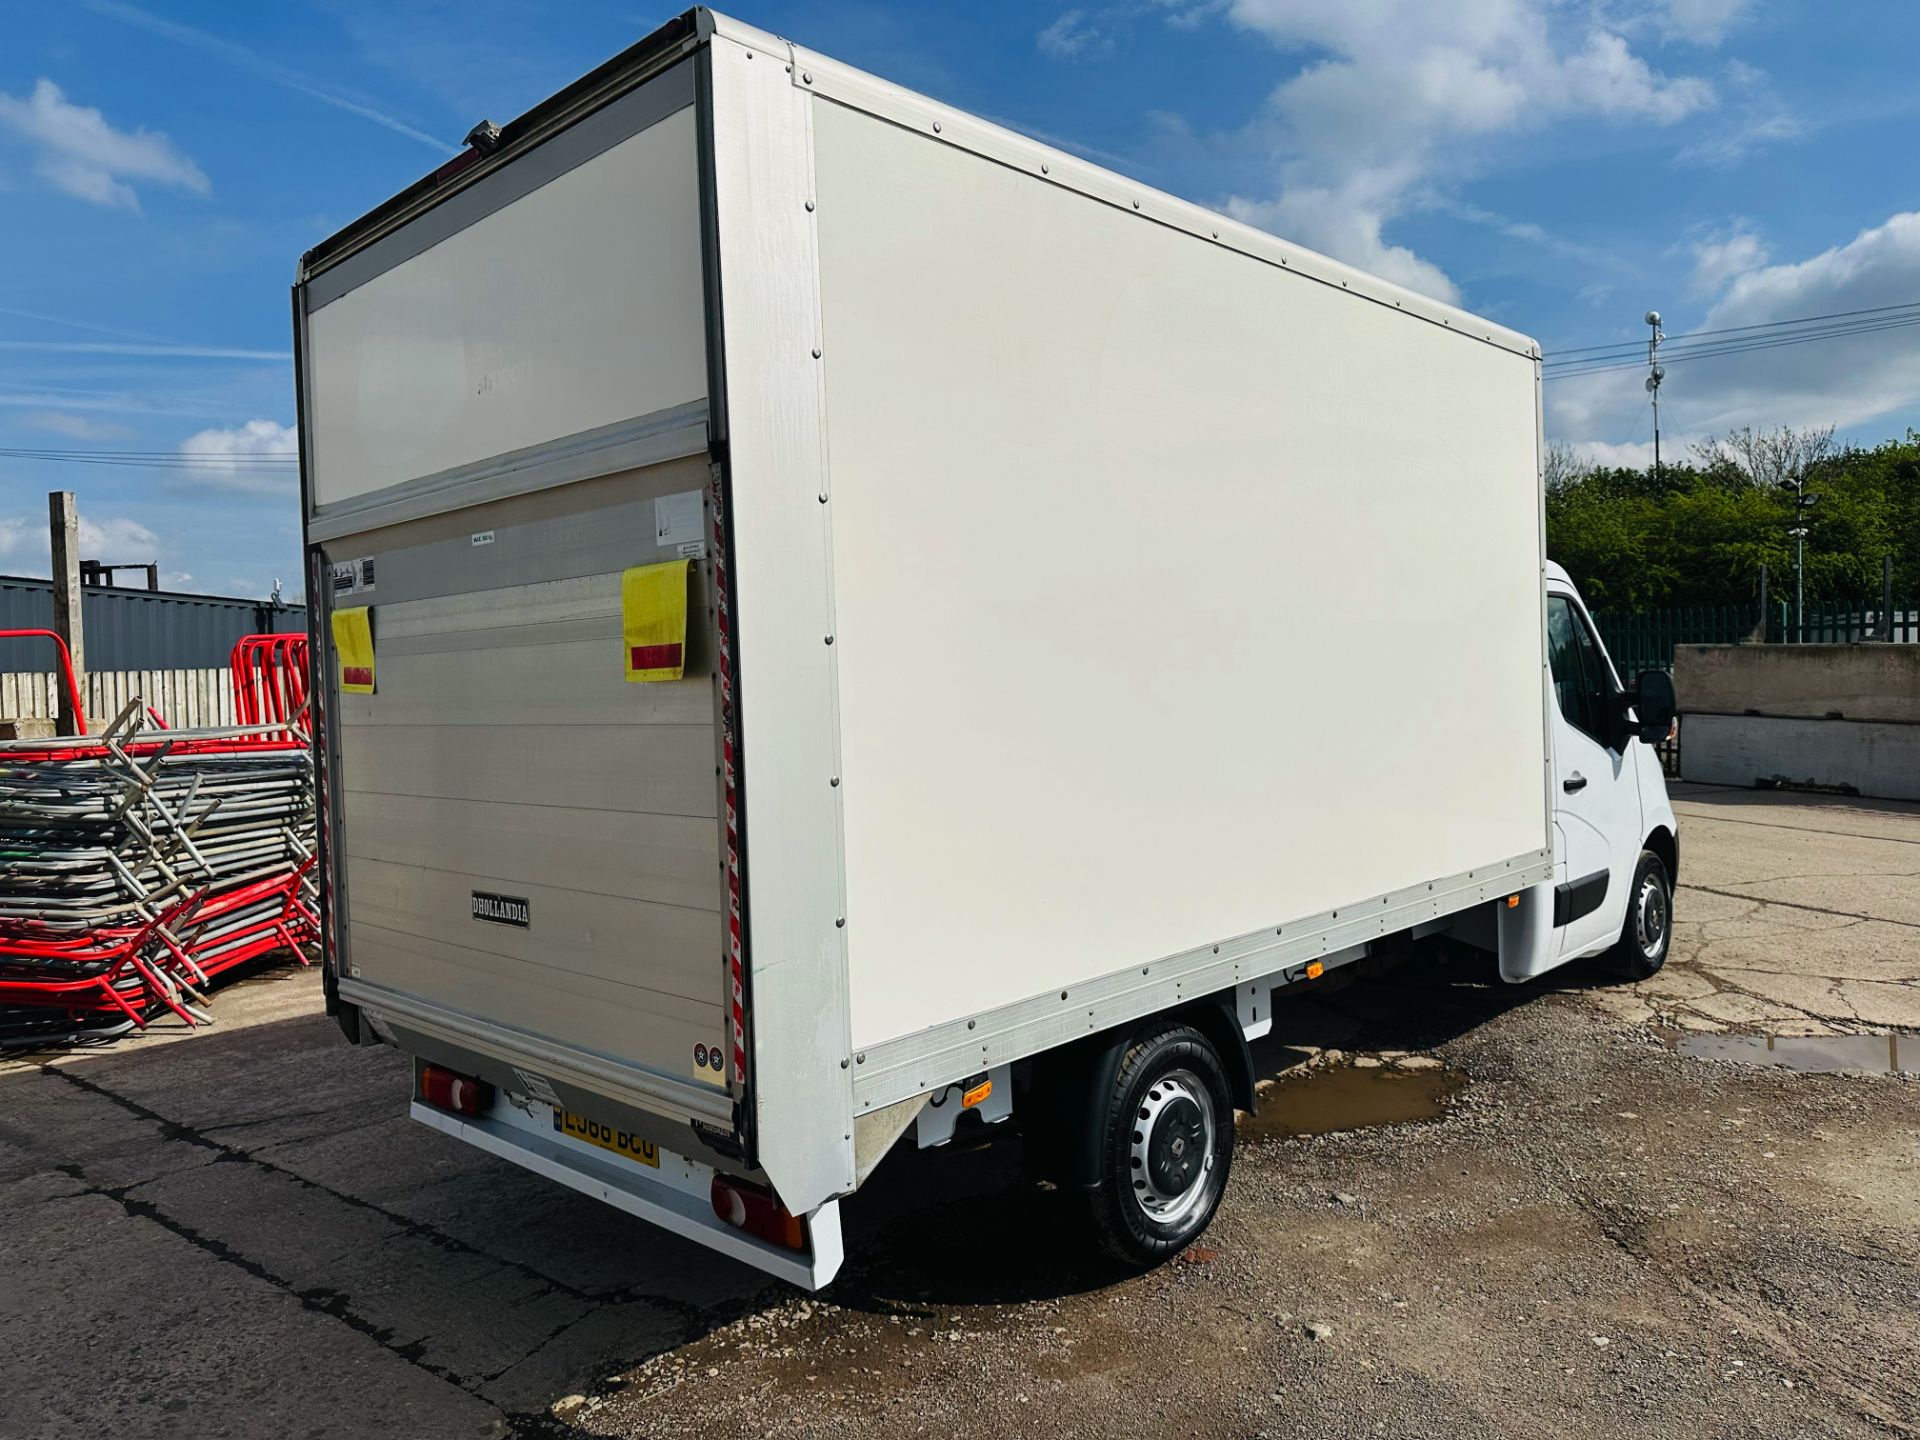 Renault Master 2.3 DCI 130 Business Edition Lwb (Luton / Box Van) - 2019 Model - Euro 6 - Tail Lift - Image 9 of 27